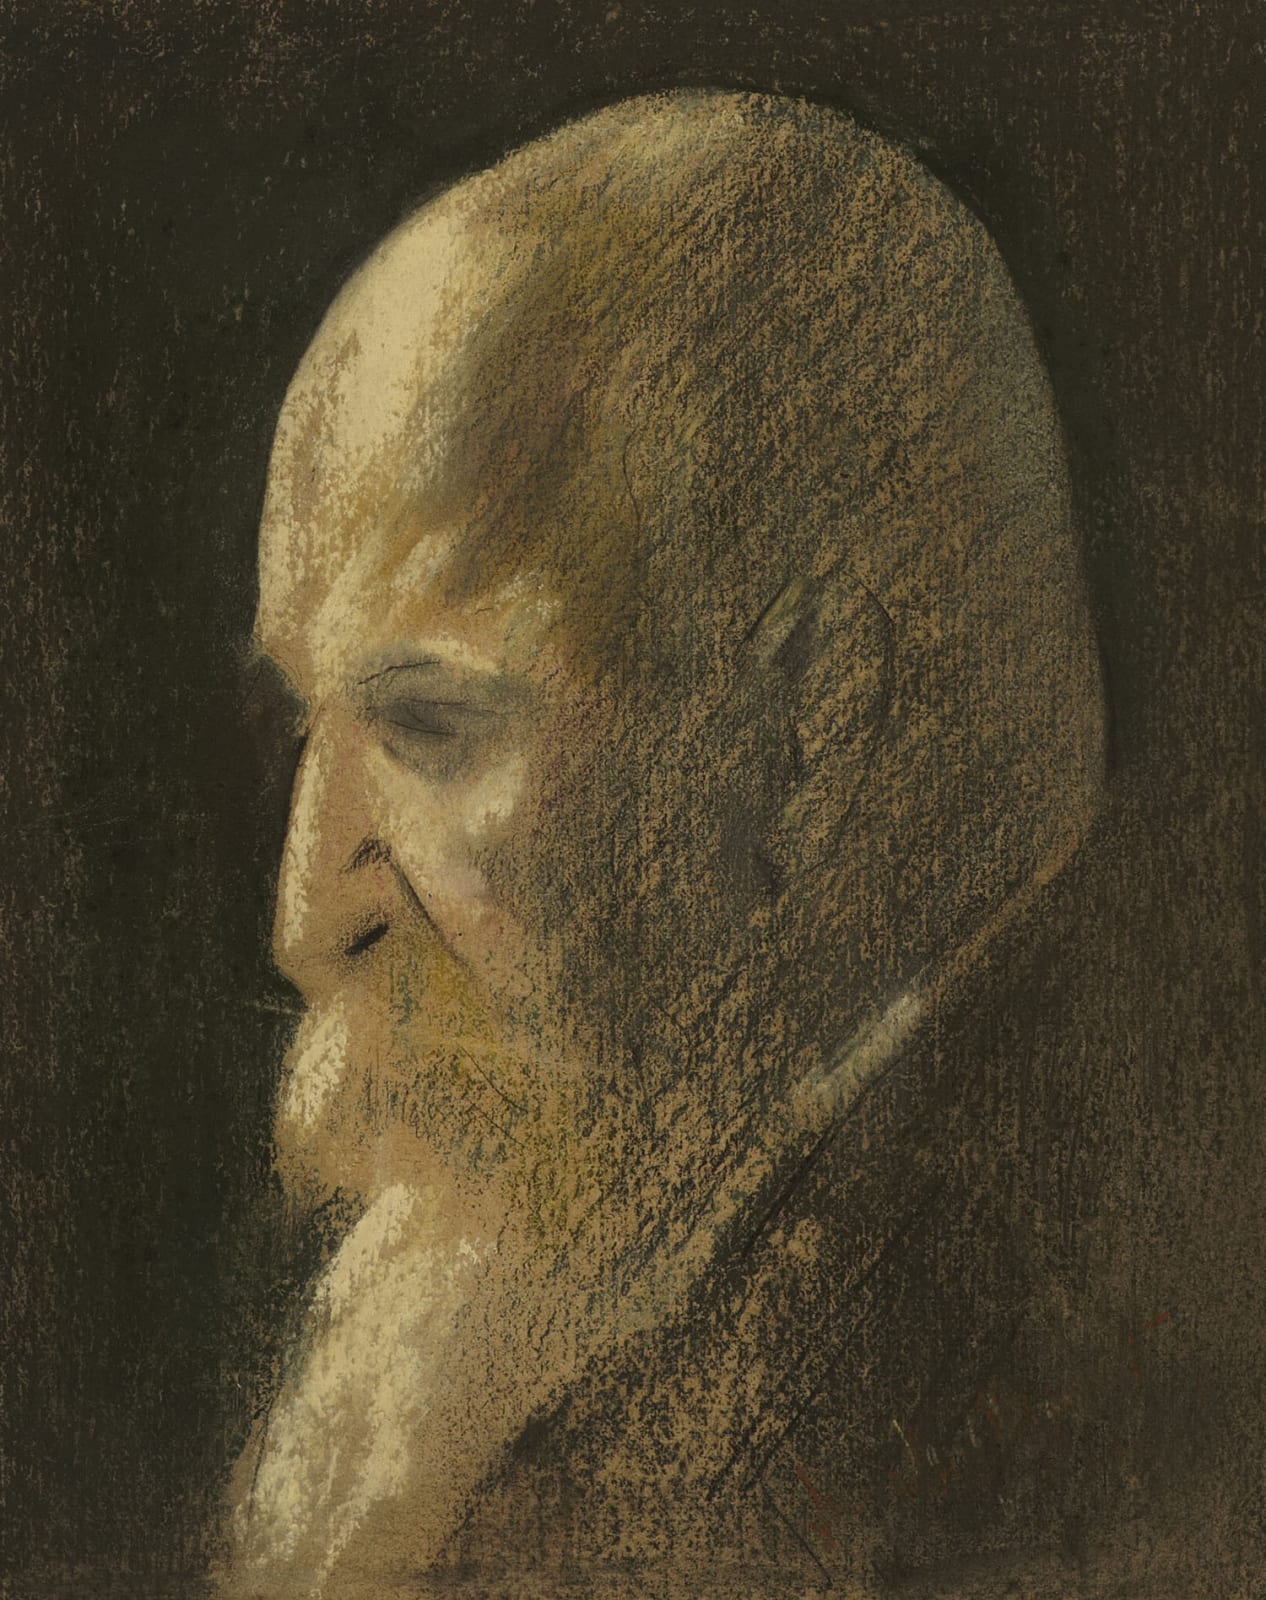 Jacob Kramer (1892-1962) Portrait of Lord Rothschild 1921 Pastel on paper 40.5 x 33 cm Ben Uri Collection © The William Roberts Society, London